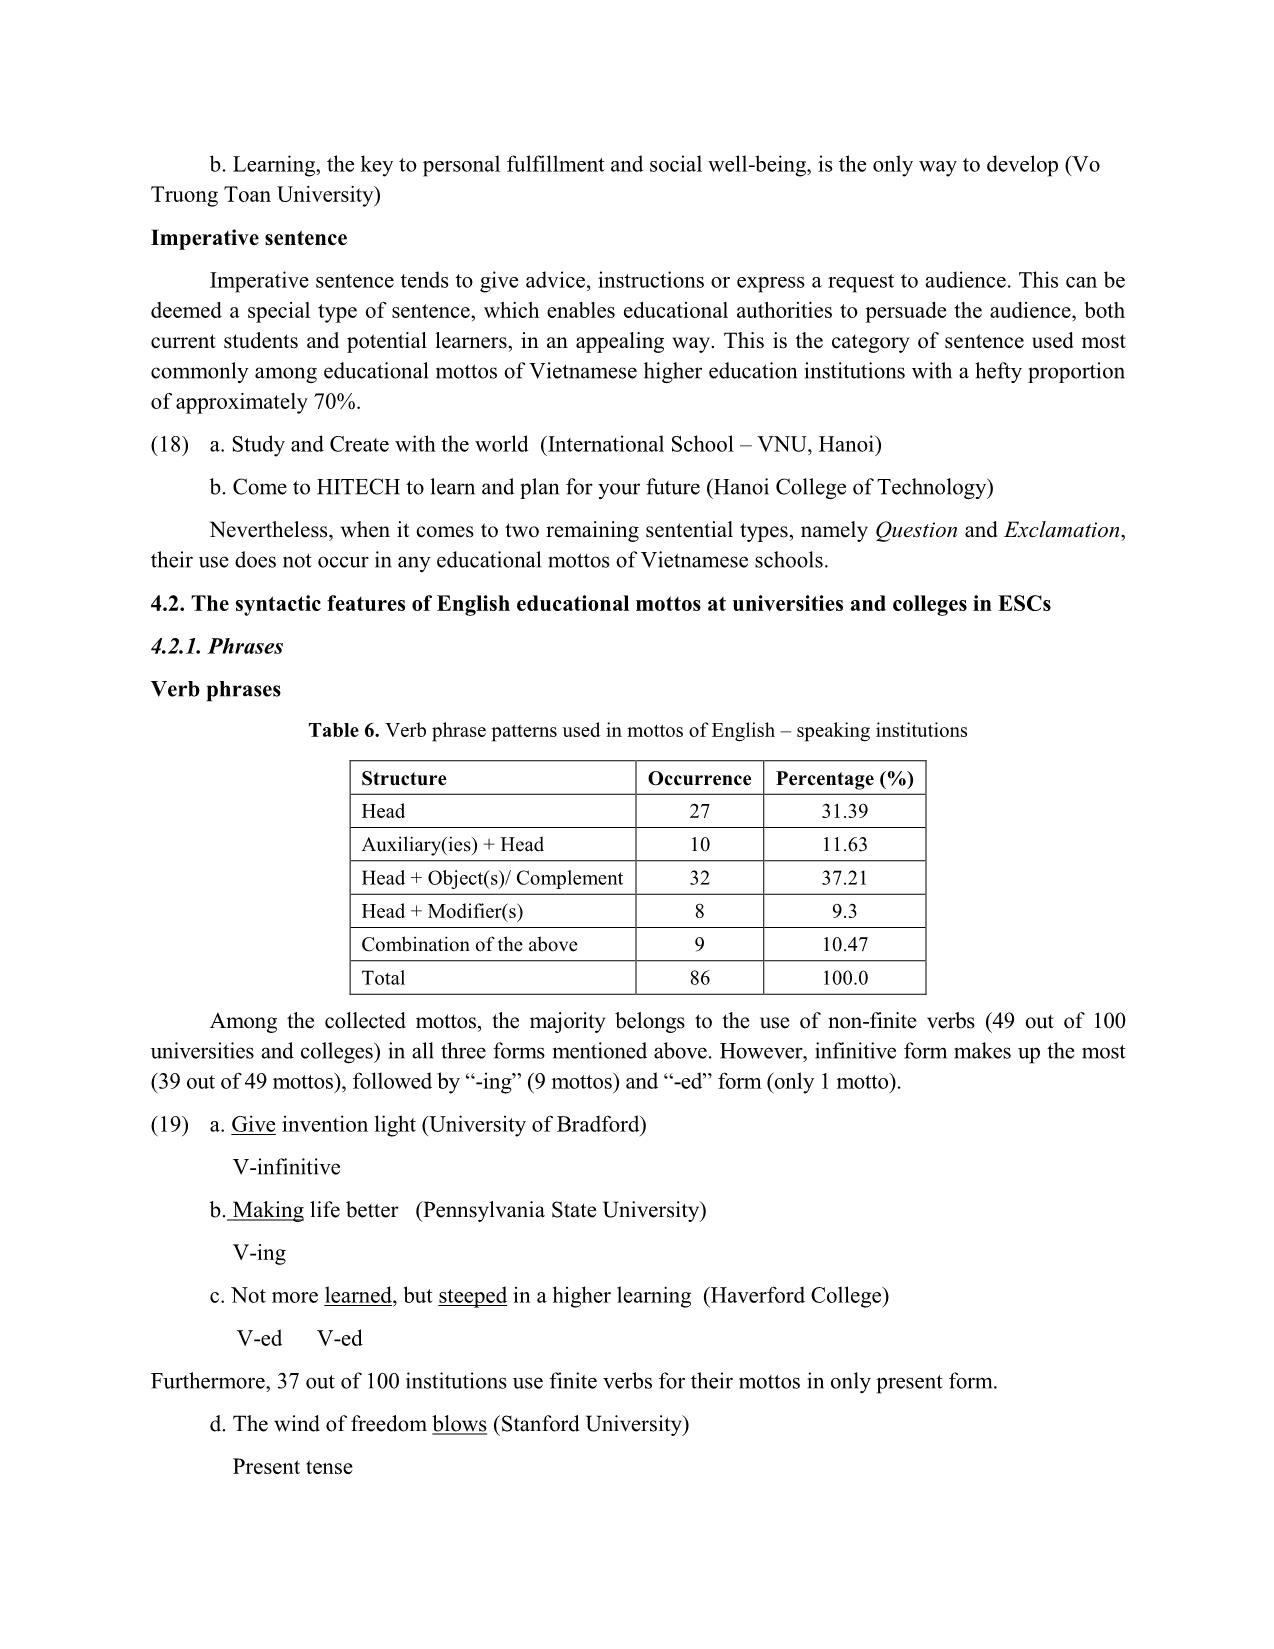 Educational mottos of tertiary institutions in Vietnam and English-Speaking countries: A study of syntactic features trang 9